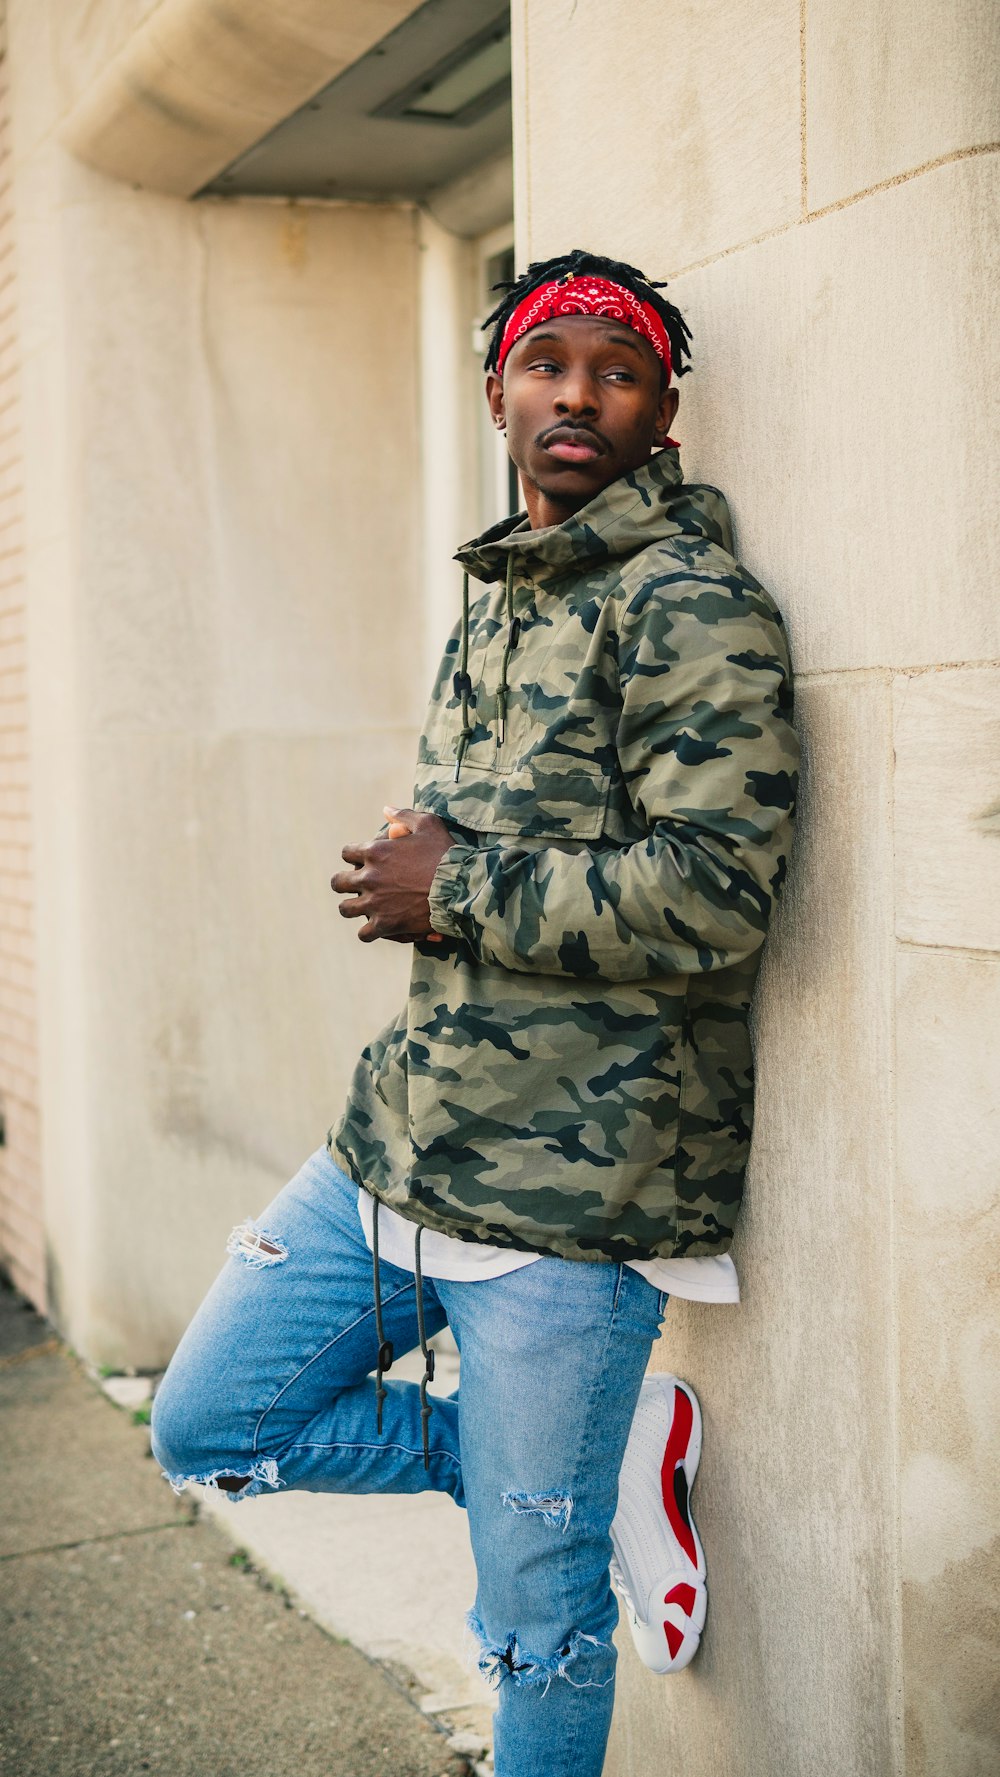 a man leaning against a wall wearing a camouflage jacket